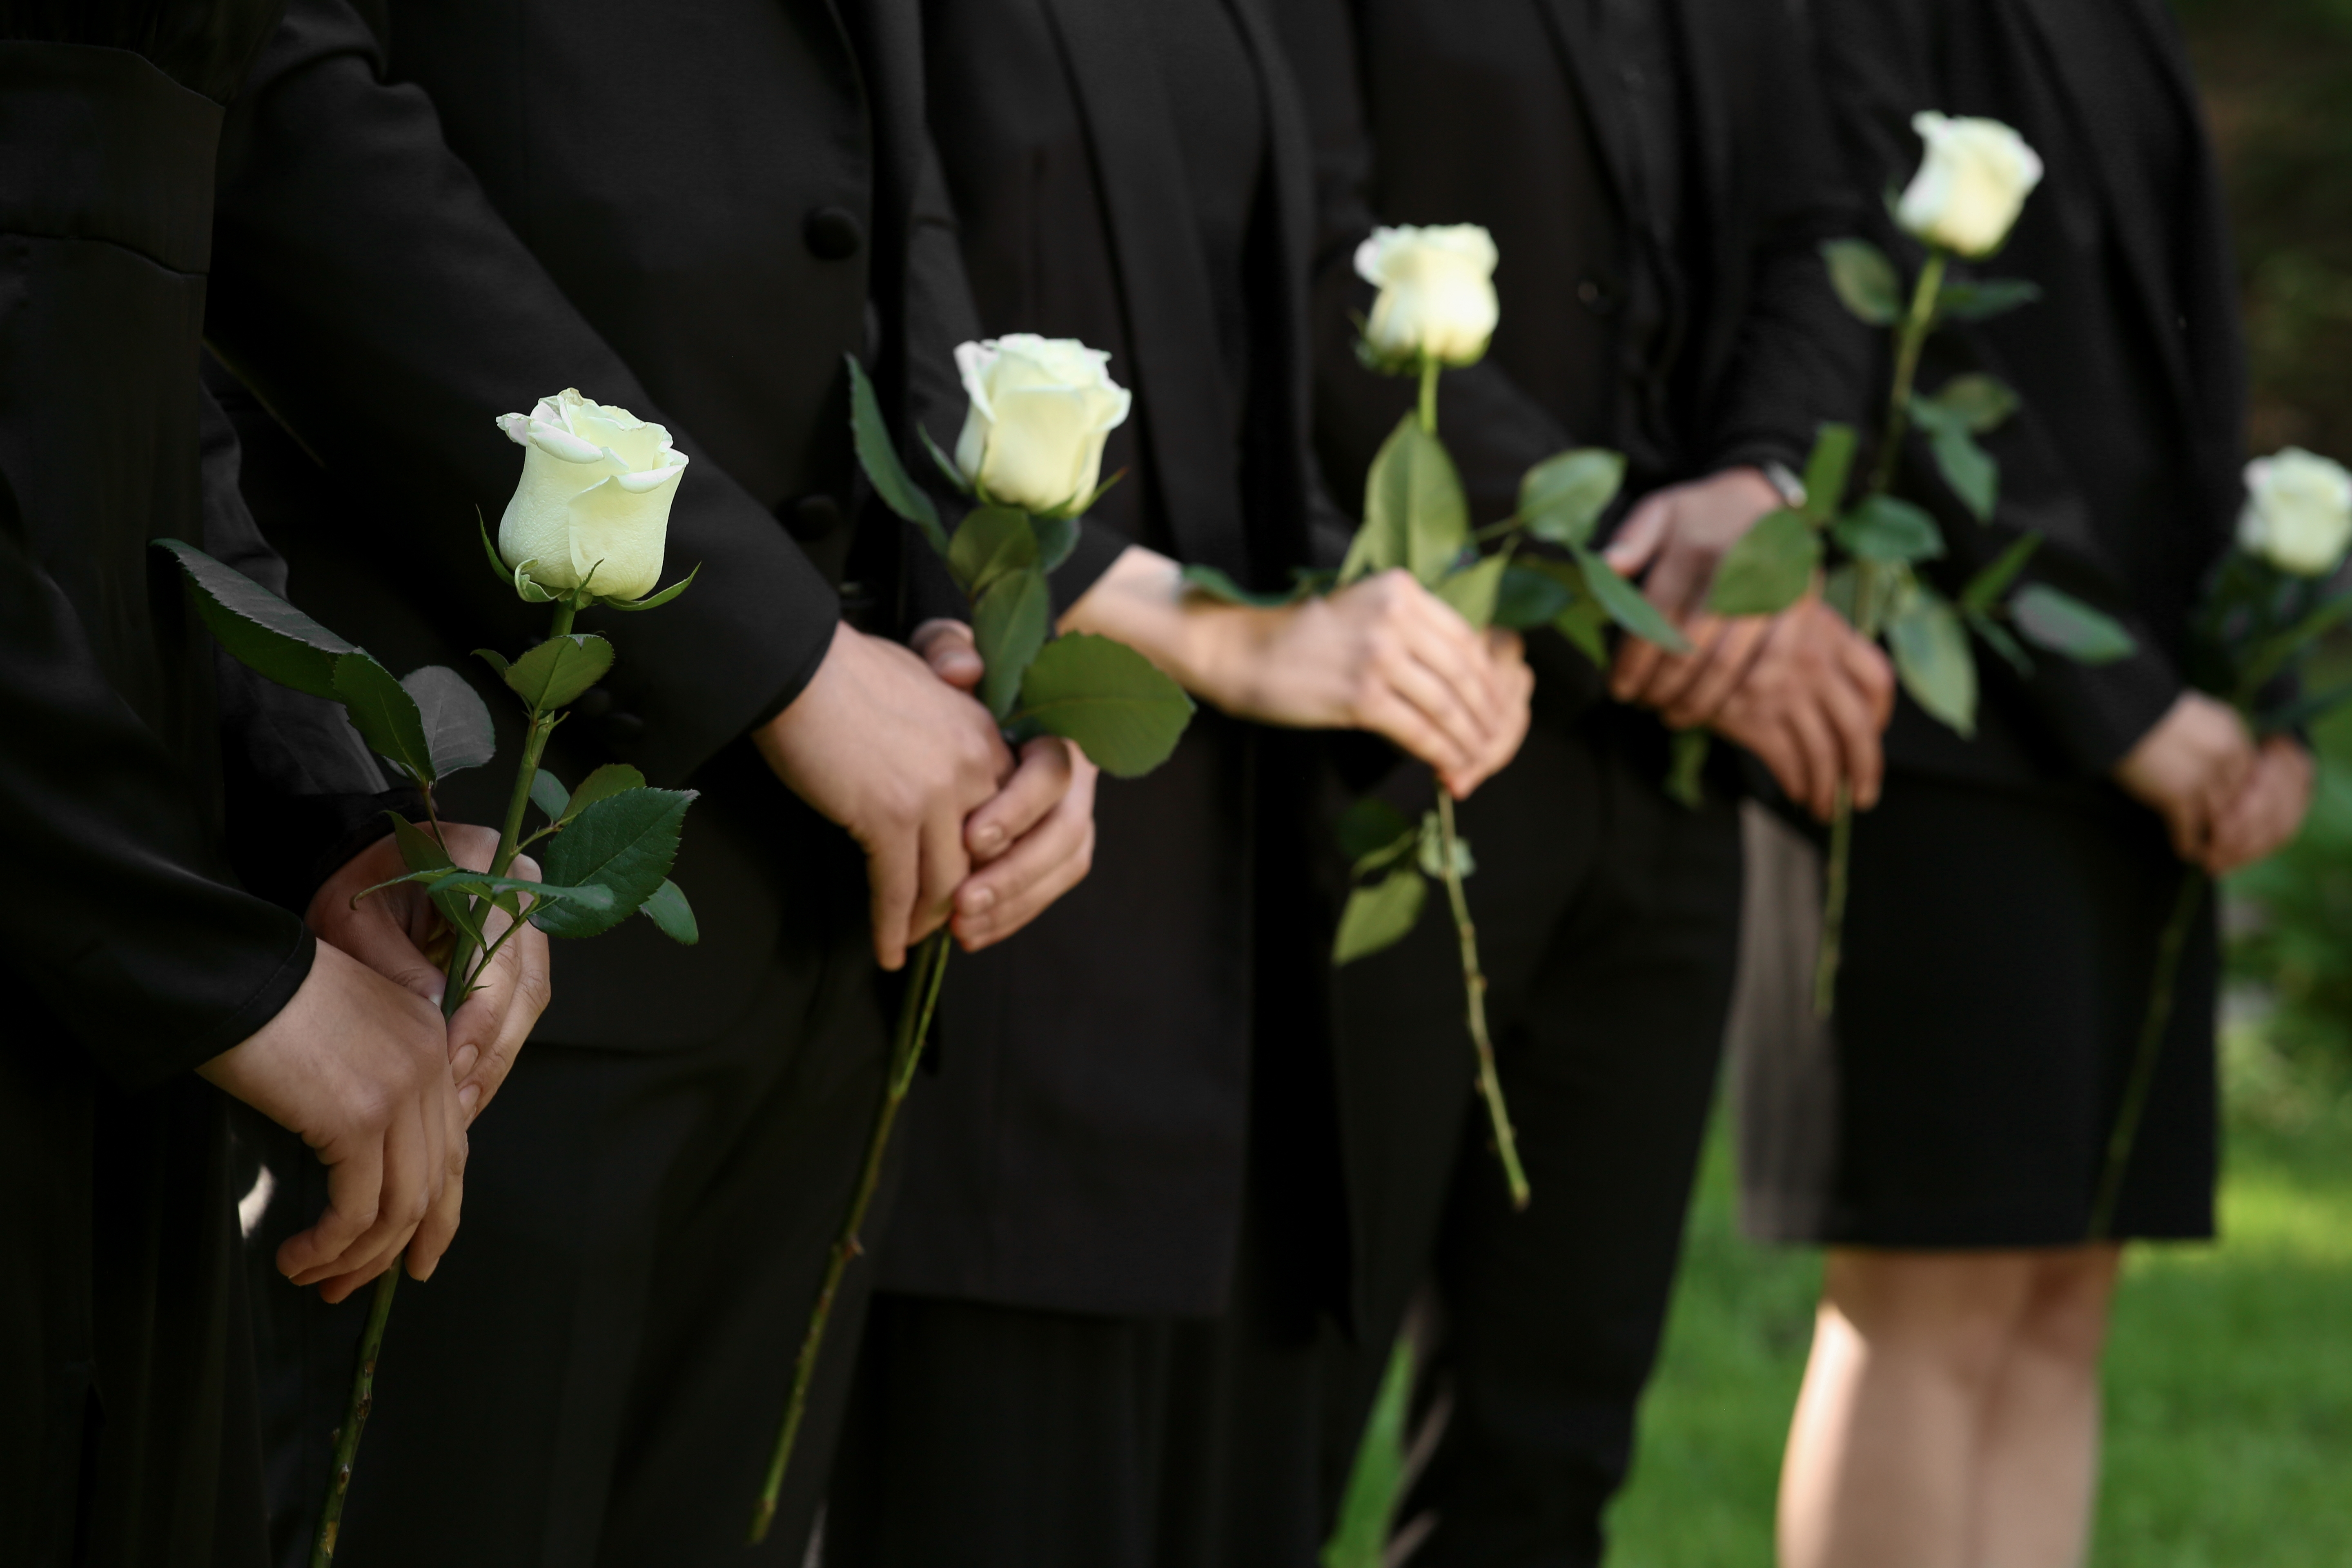 People at a funeral holding white roses | Source: Shutterstock